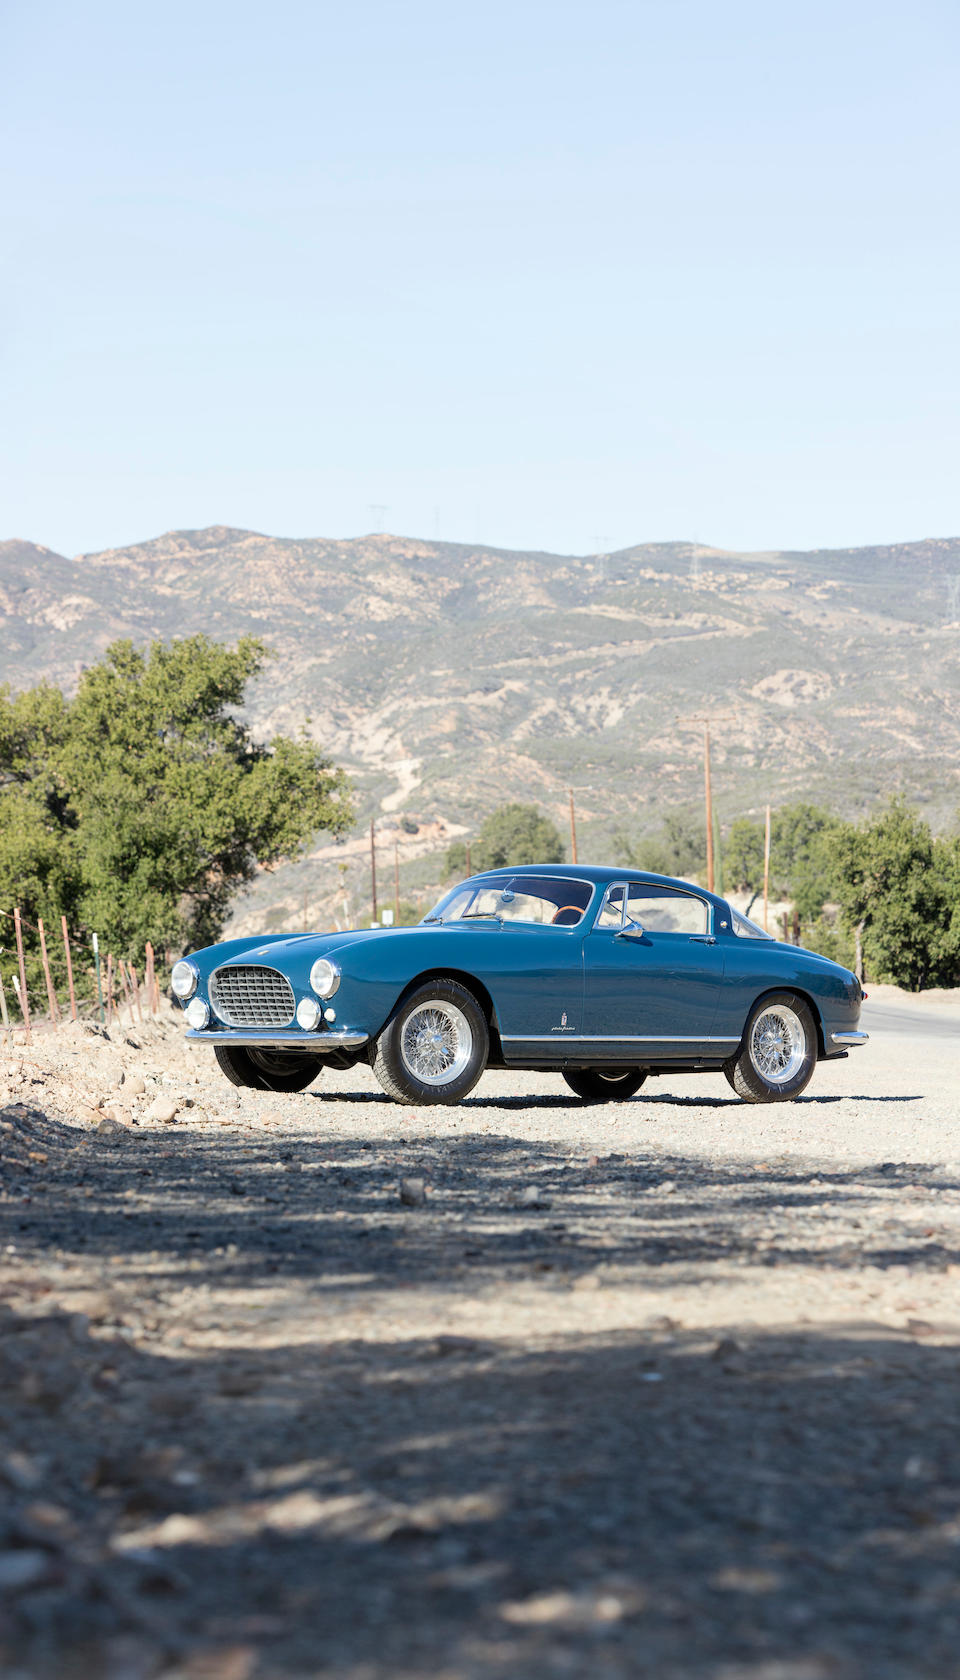 <b>1955 Ferrari 250 Europa GT Alloy</b><br />Chassis no. 0389 GT<br />Engine no. 0389 GT